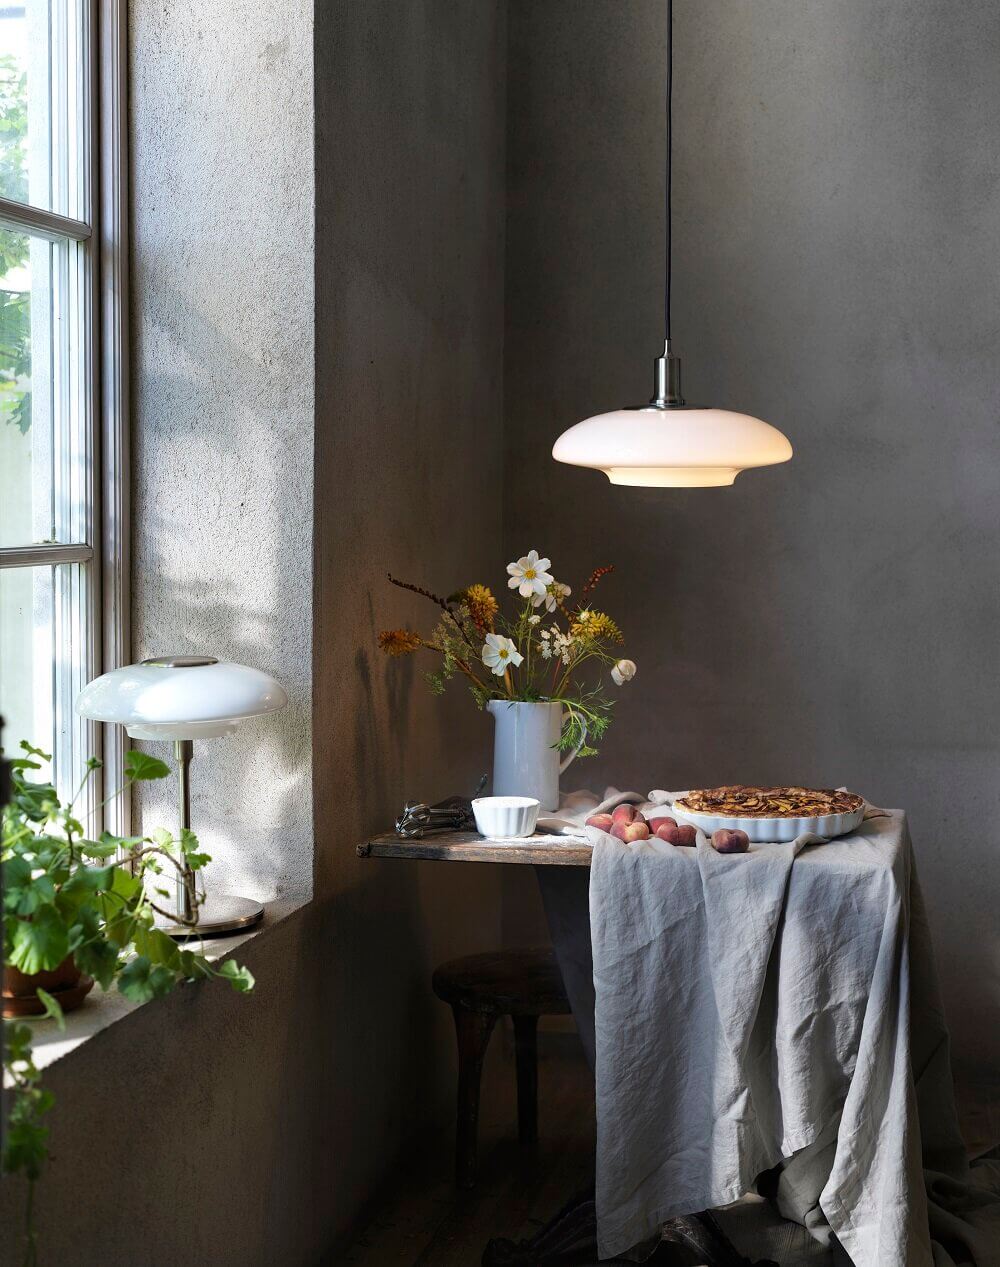 ikea spring collection 2020 mindful living nordroom8 IKEA Spring Collection 2020: Mindful Living and Close to Nature